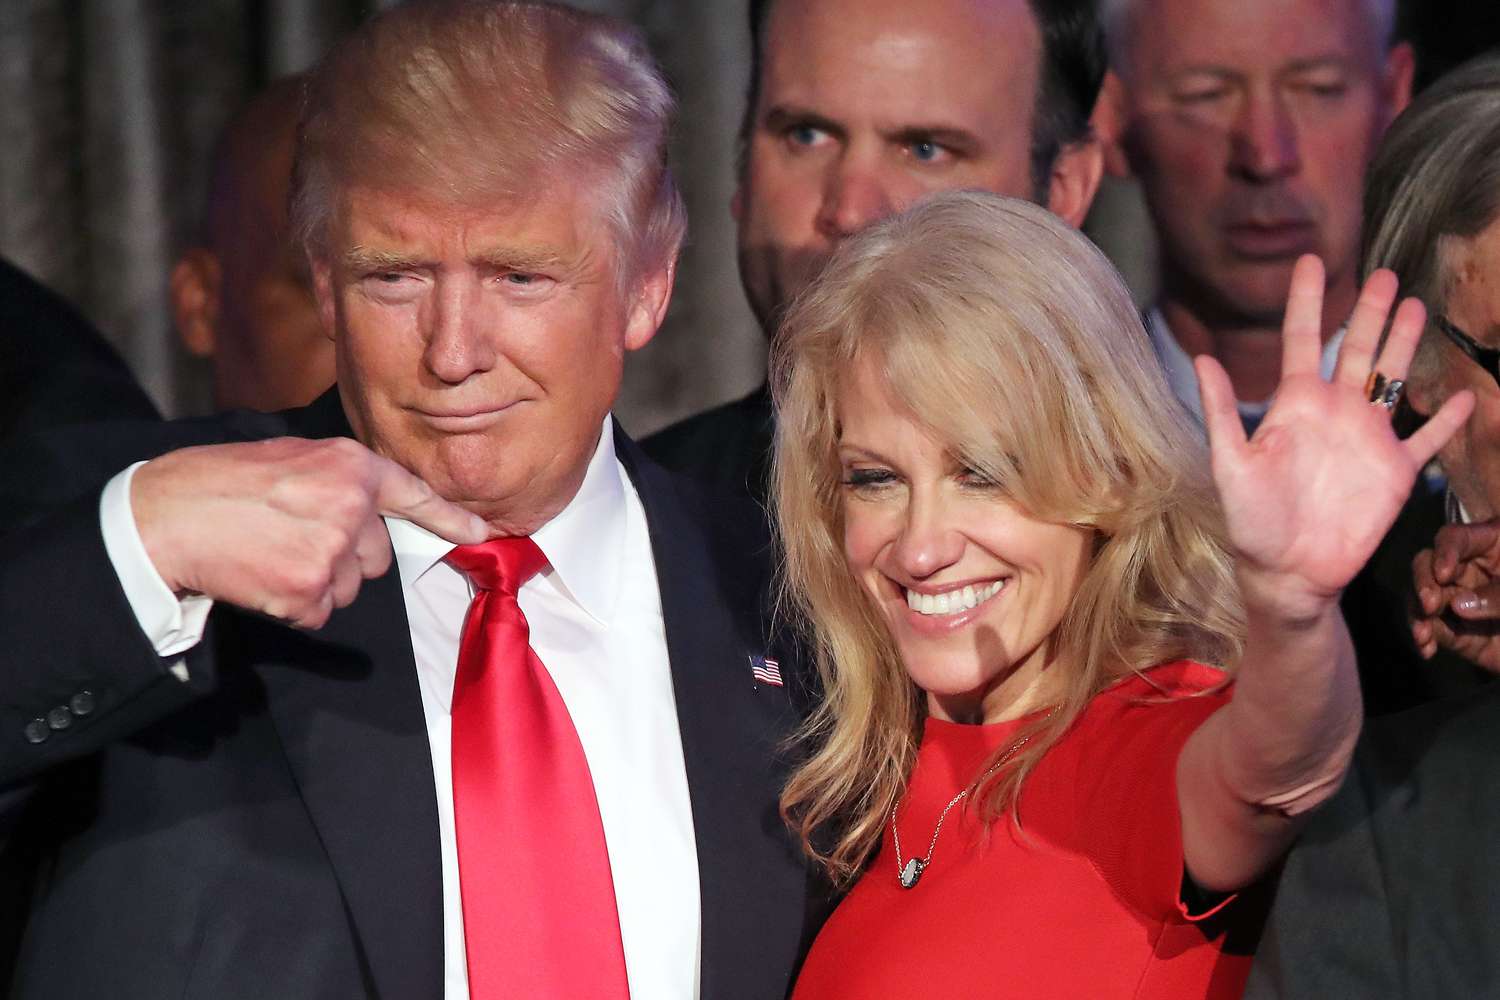 Republican president-elect Donald Trump along with his campaign manager Kellyanne Conway acknowledge the crowd during his election night event at the New York Hilton Midtown in the early morning hours of November 9, 2016 in New York City. Donald Trump defeated Democratic presidential nominee Hillary Clinton to become the 45th president of the United States.